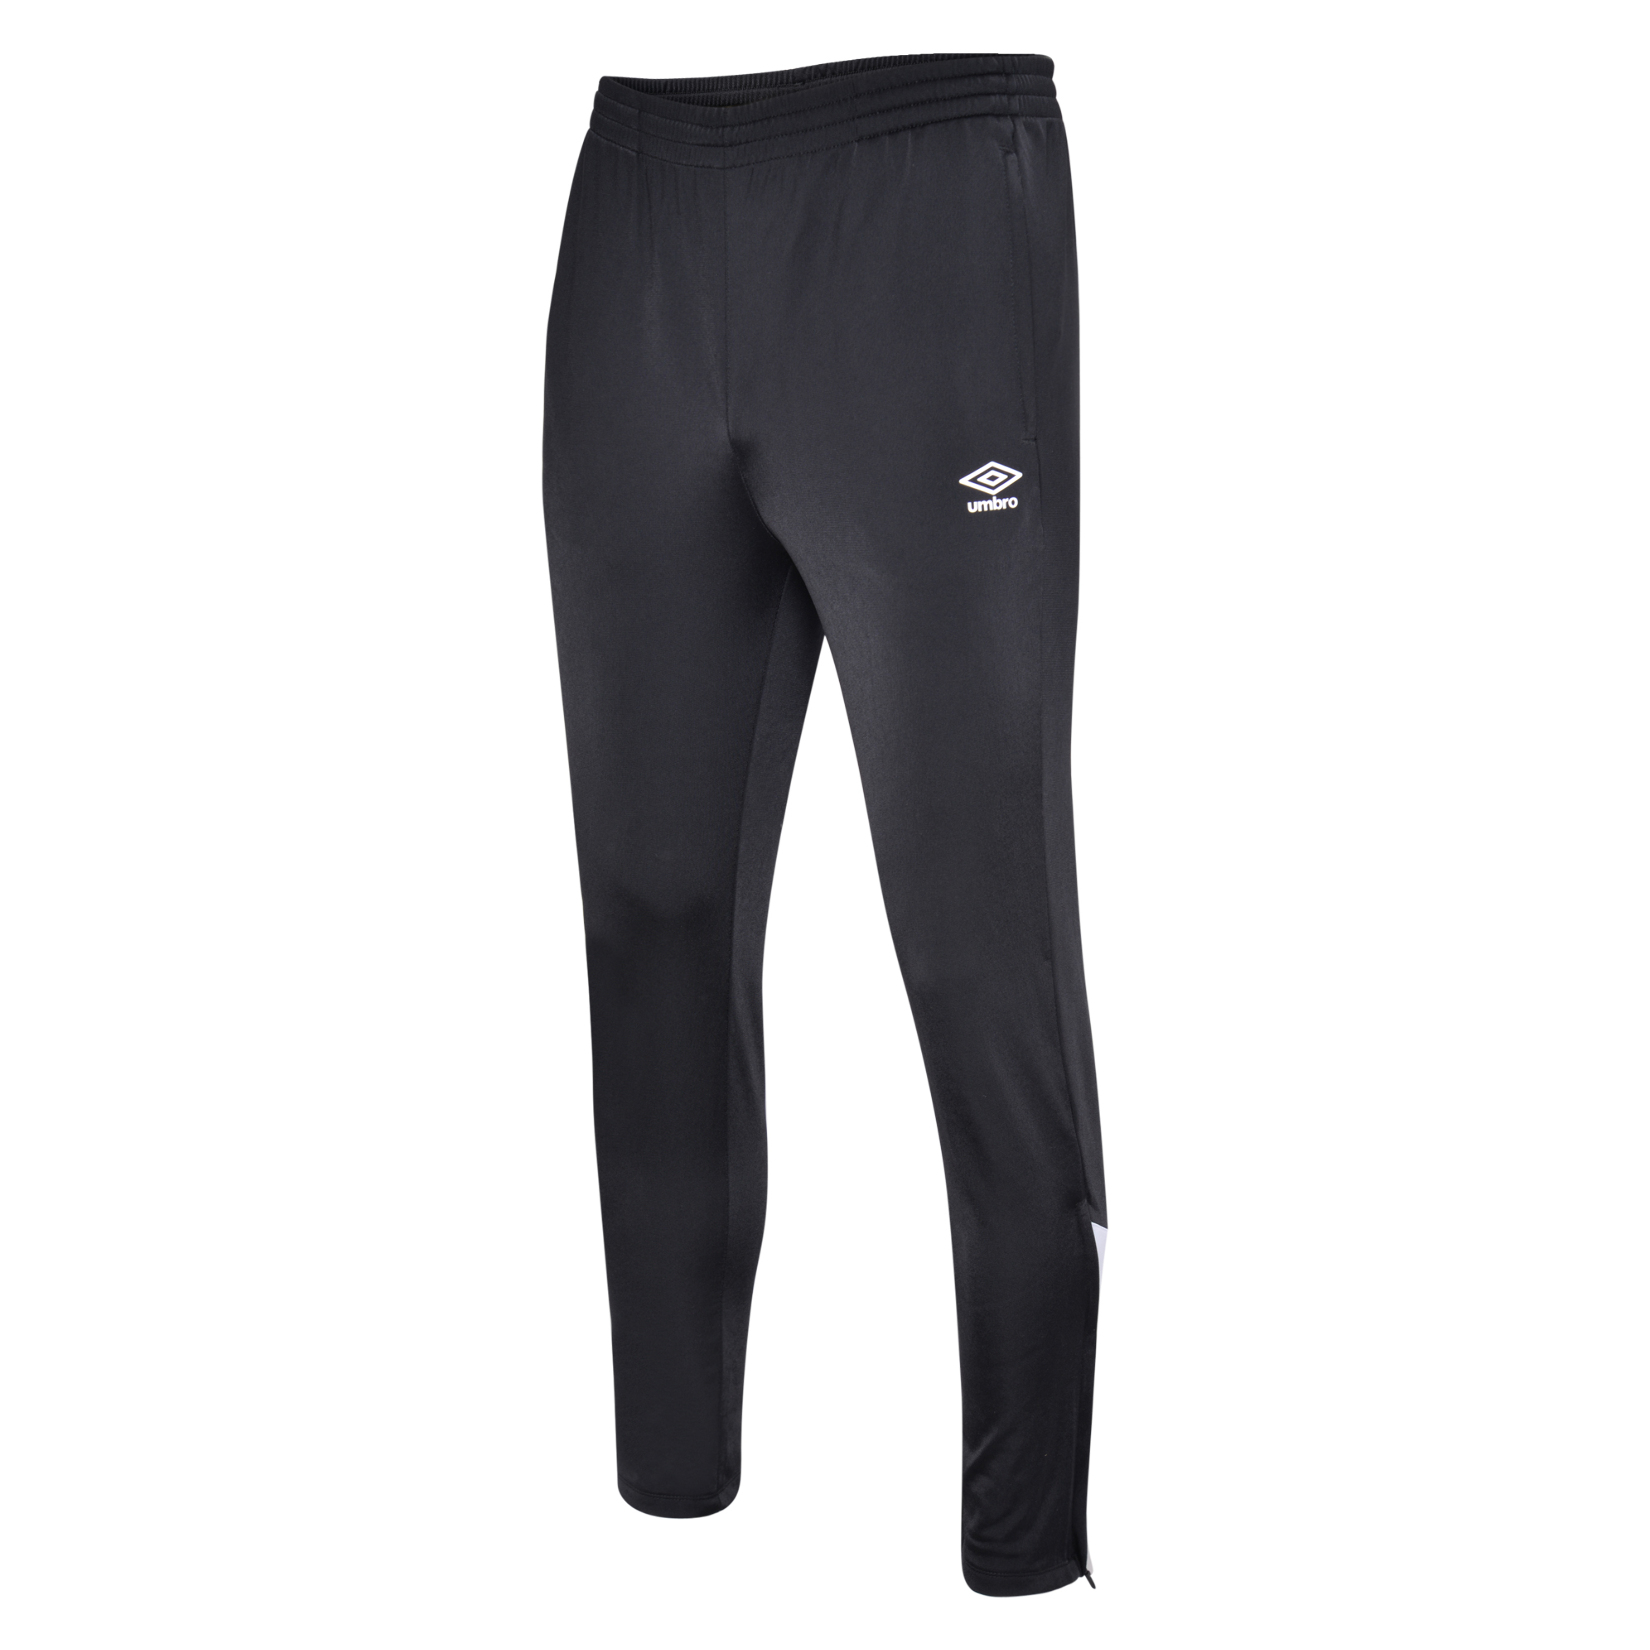 Umbro Knitted Pant